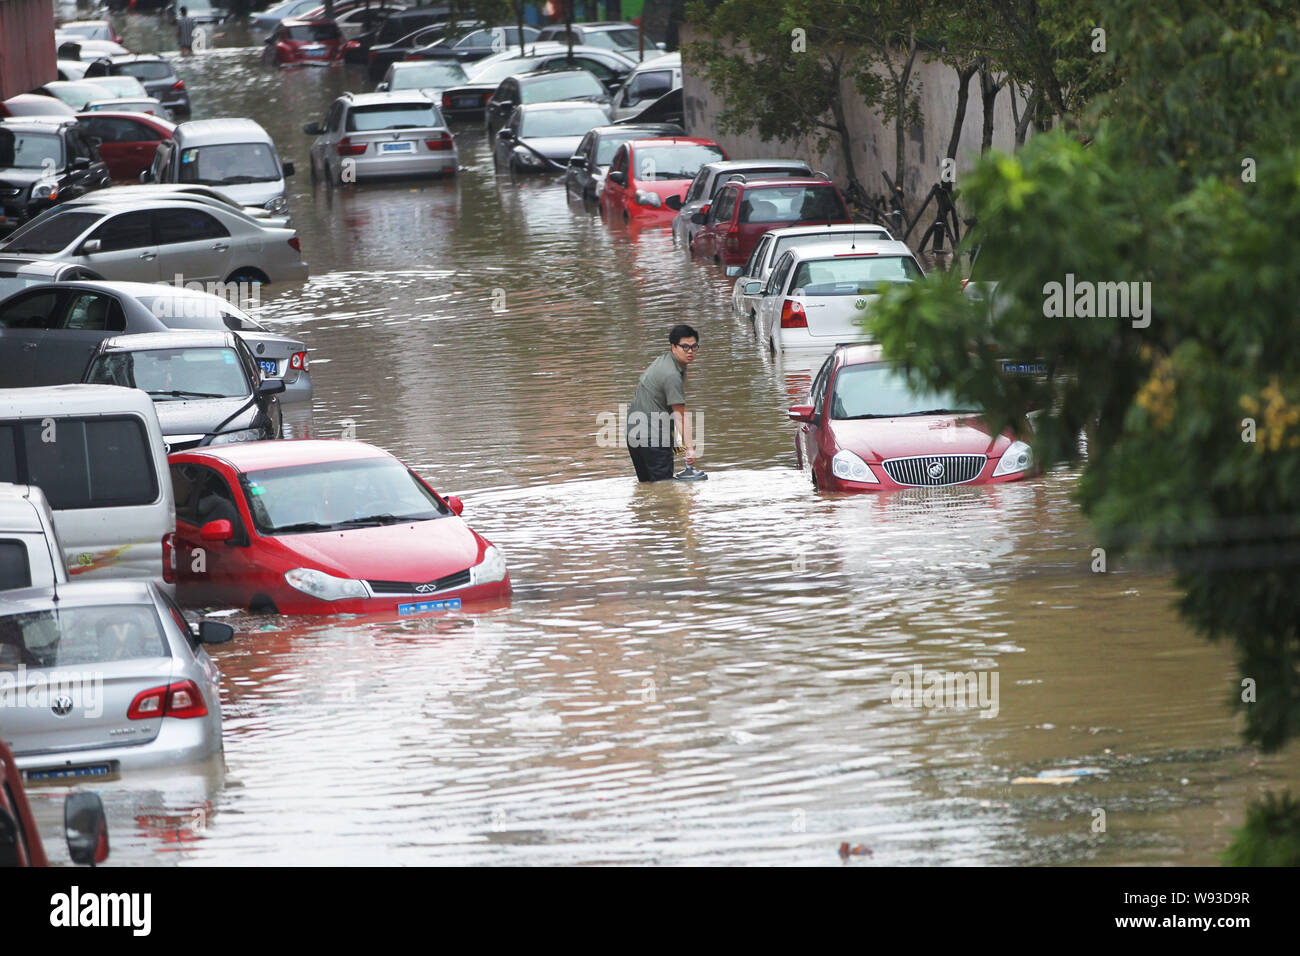 A Chinese man walks past private cars half submerged by floodwaters after heavy rains caused by Typhoon Fitow in RuiAn city, east Chinas Zhejiang prov Stock Photo